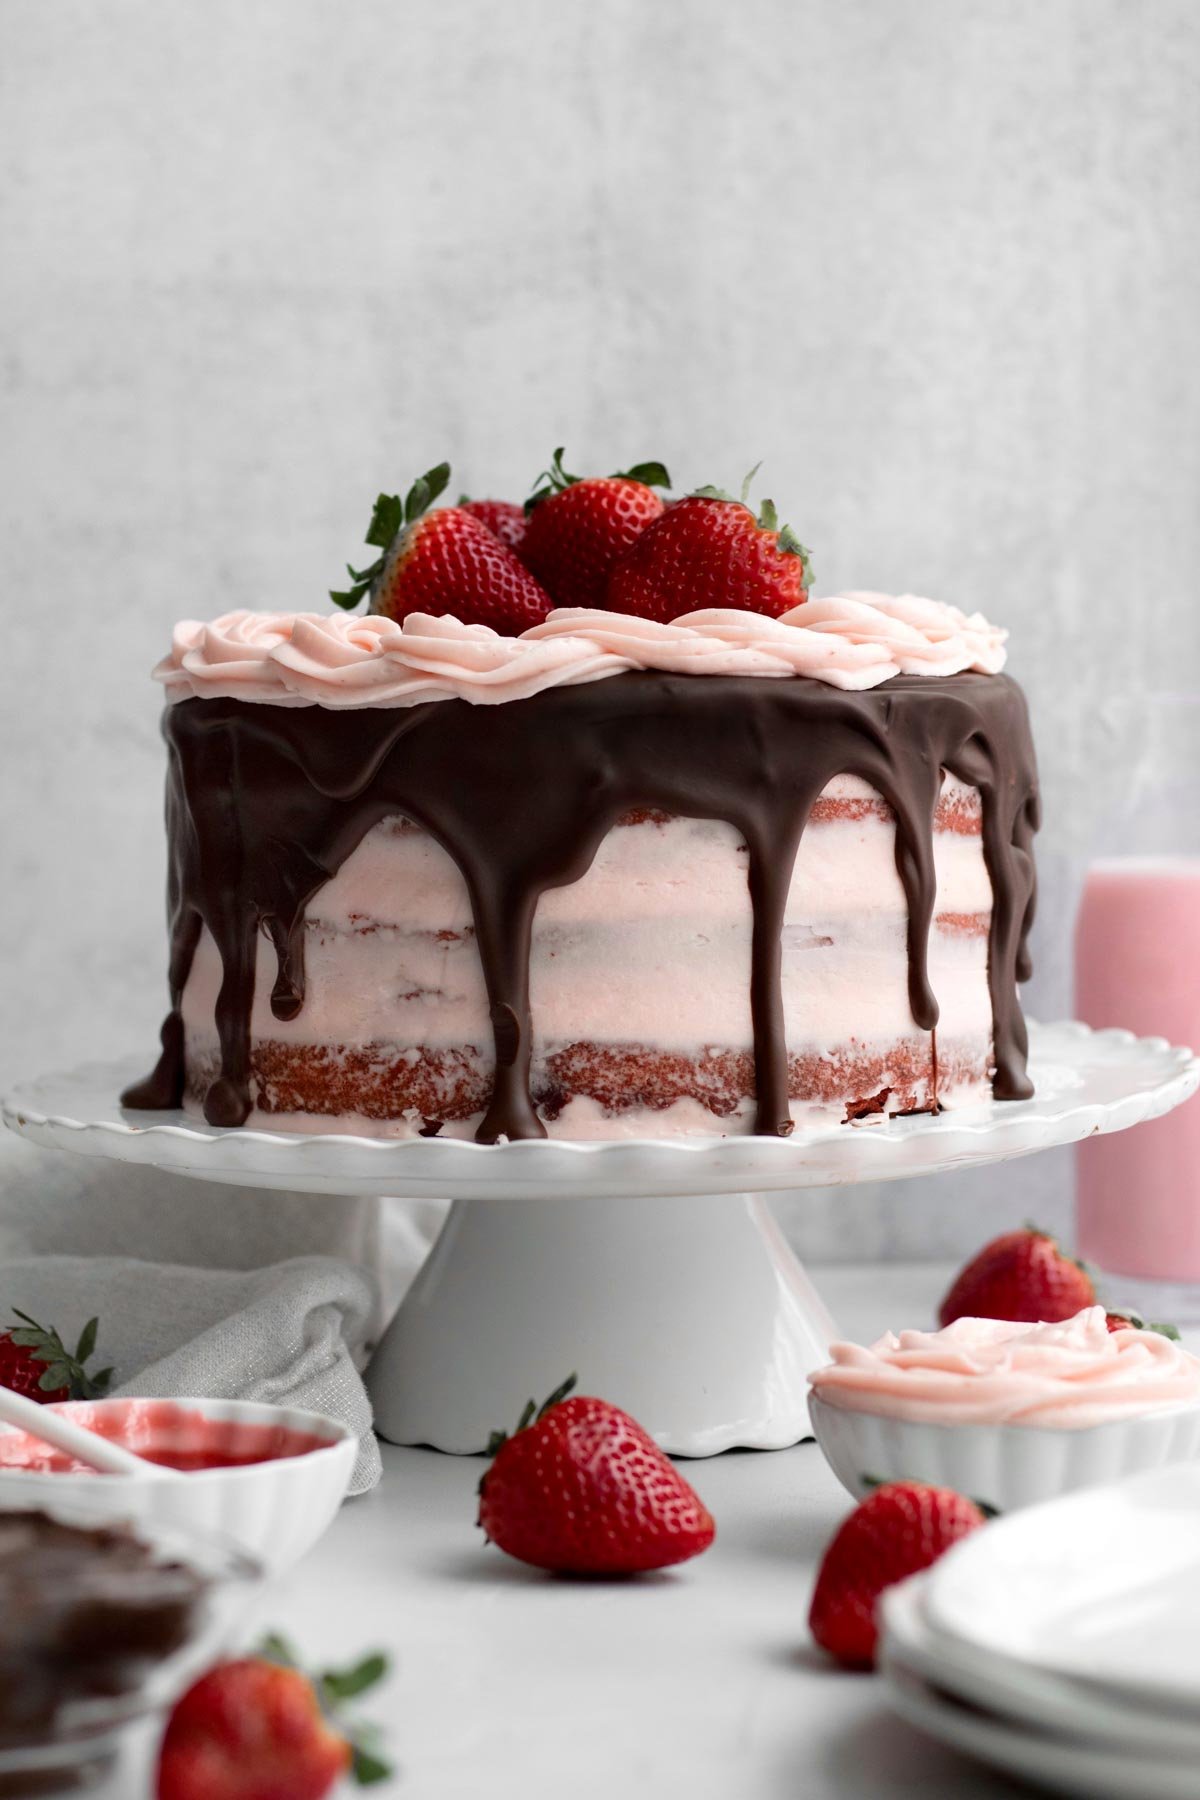 Strawberry Red Velvet Cake on a cake stand with extra strawberries.